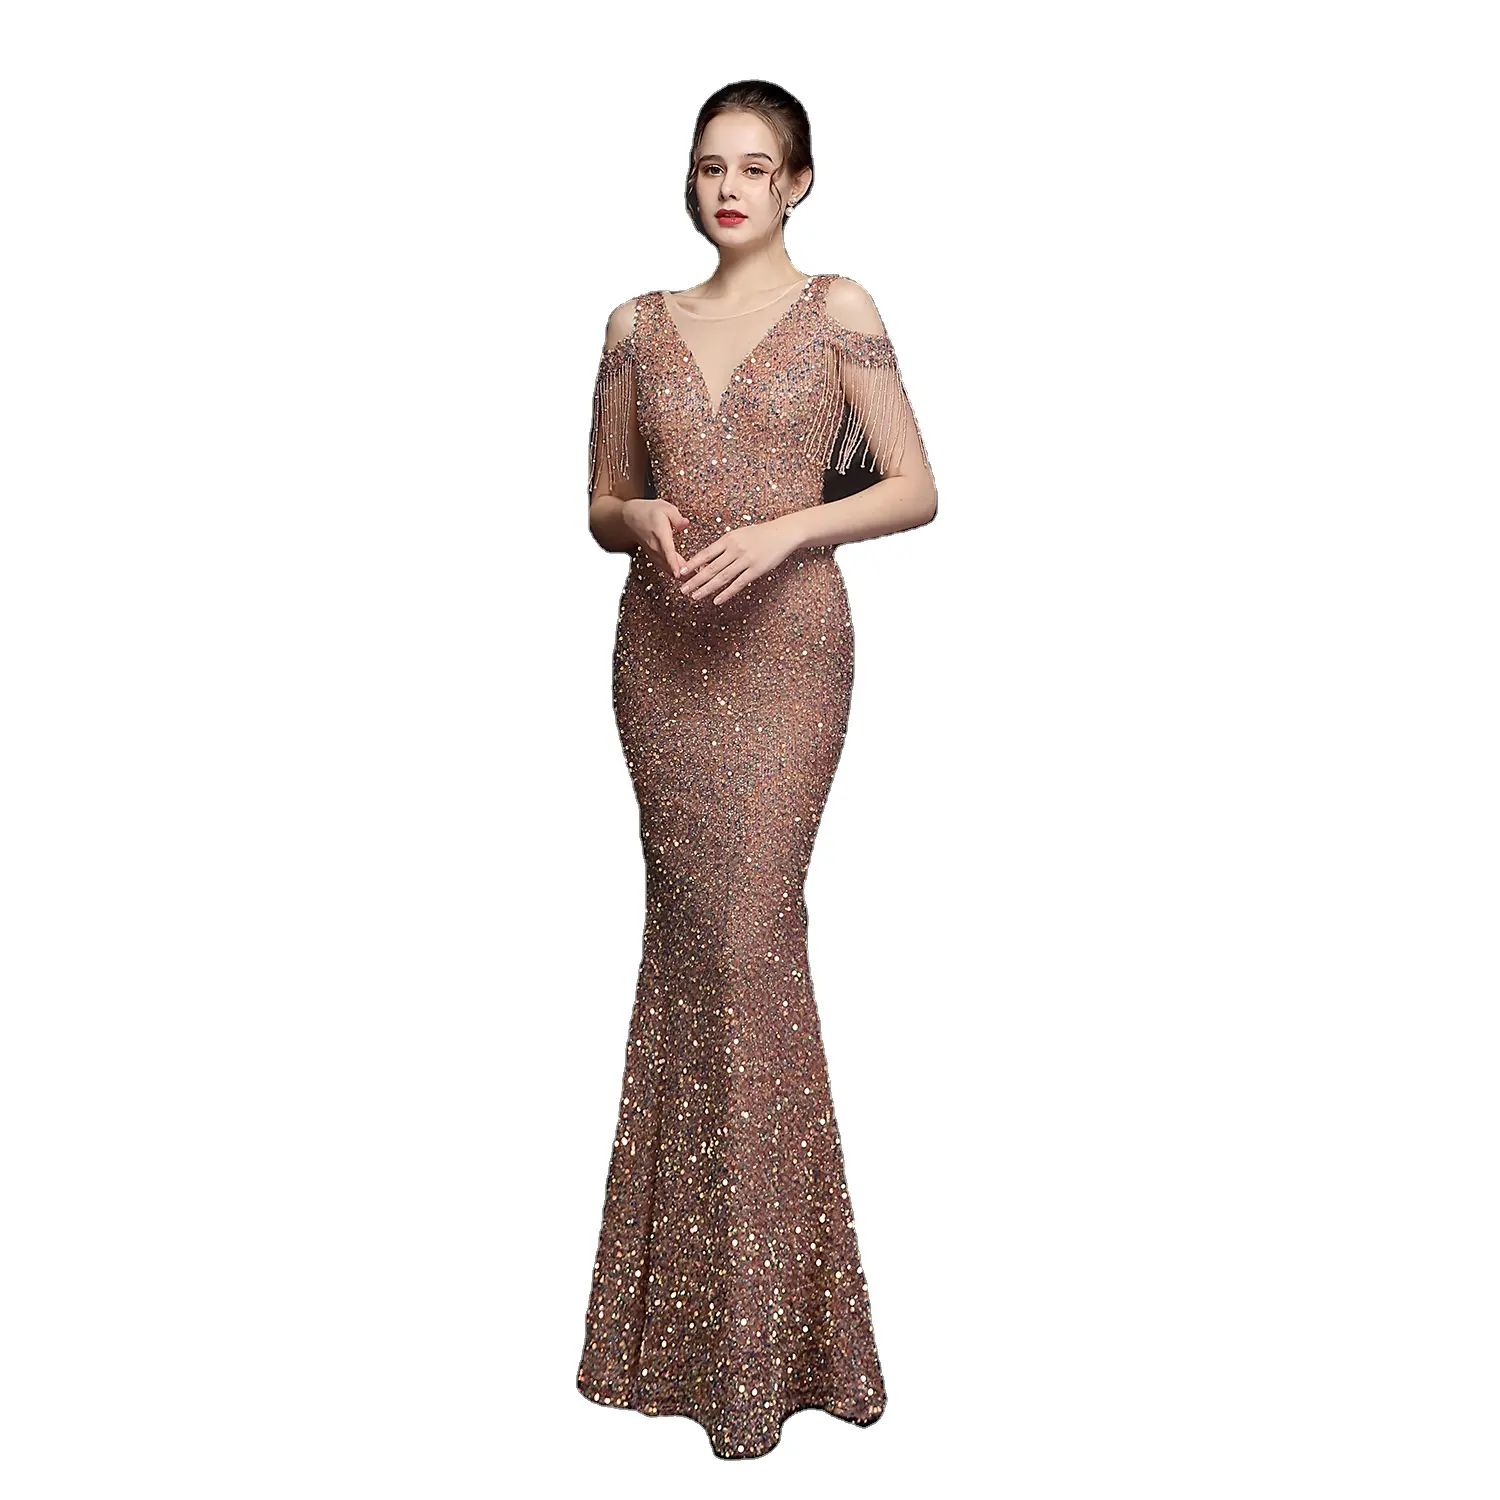 Morden Style High Quality Lady For Woman Prom Dress 2021 Evening Gown